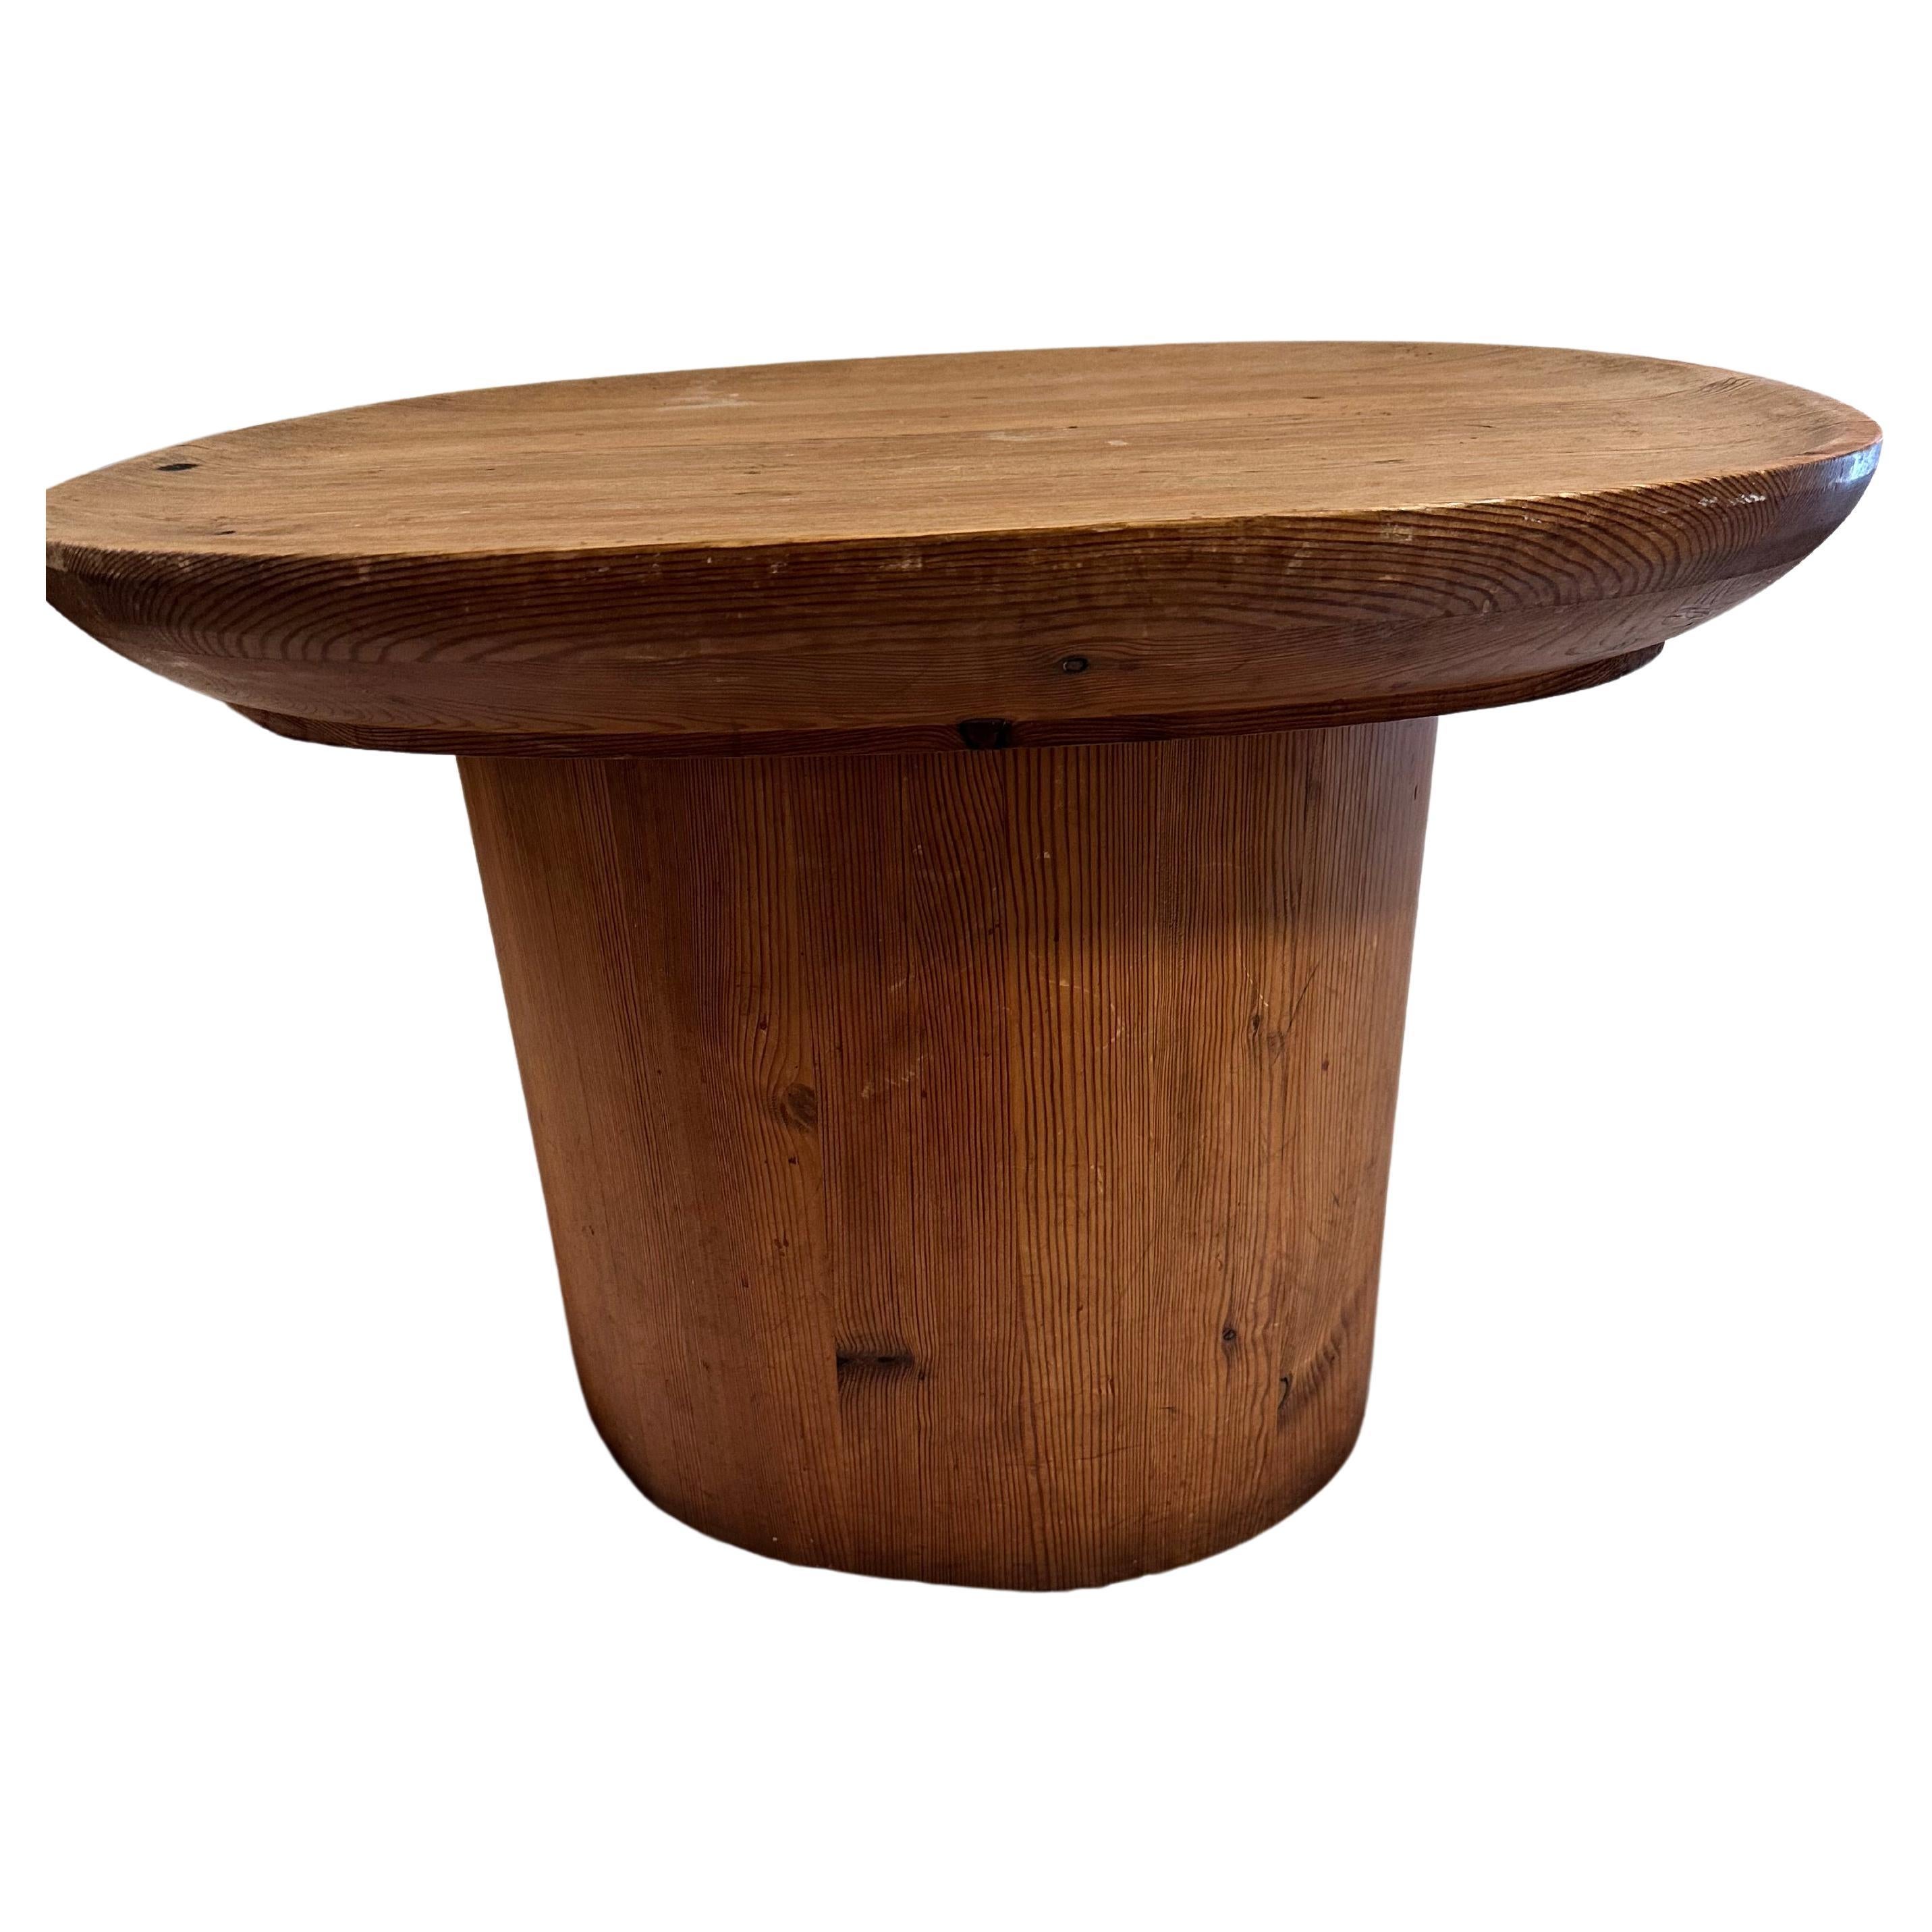 Axel Einar Hjorth Uto table, Sweden, 1930s
Acquired by original owner in Sweden 